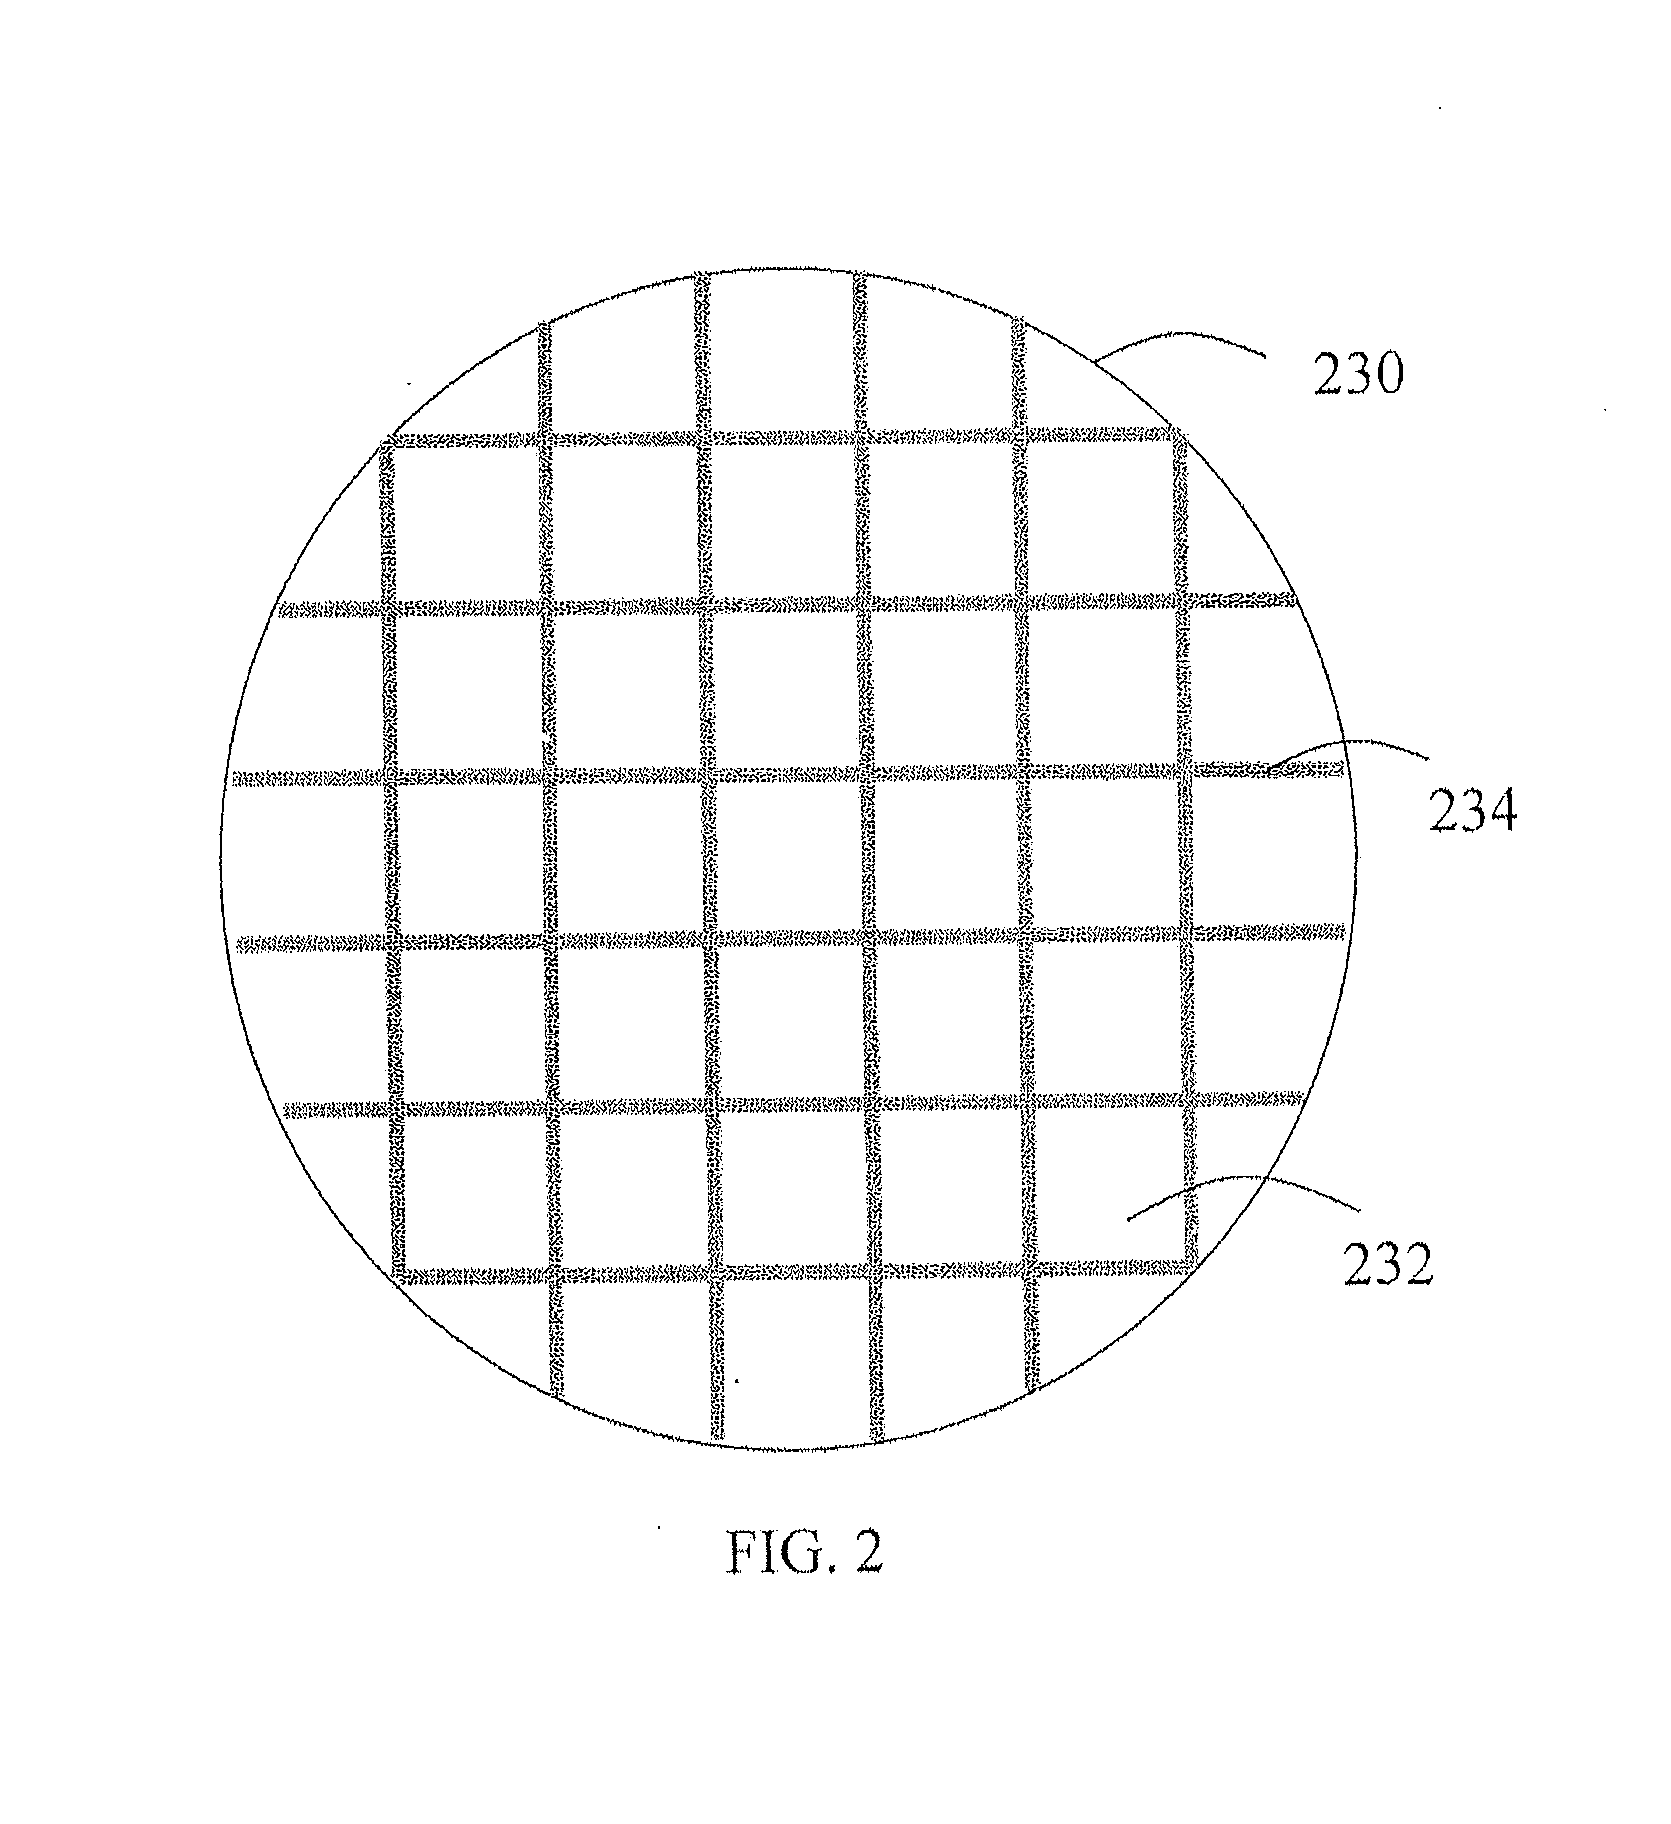 Diffractive optical elements and methods for patterning thin film electrochemical devices